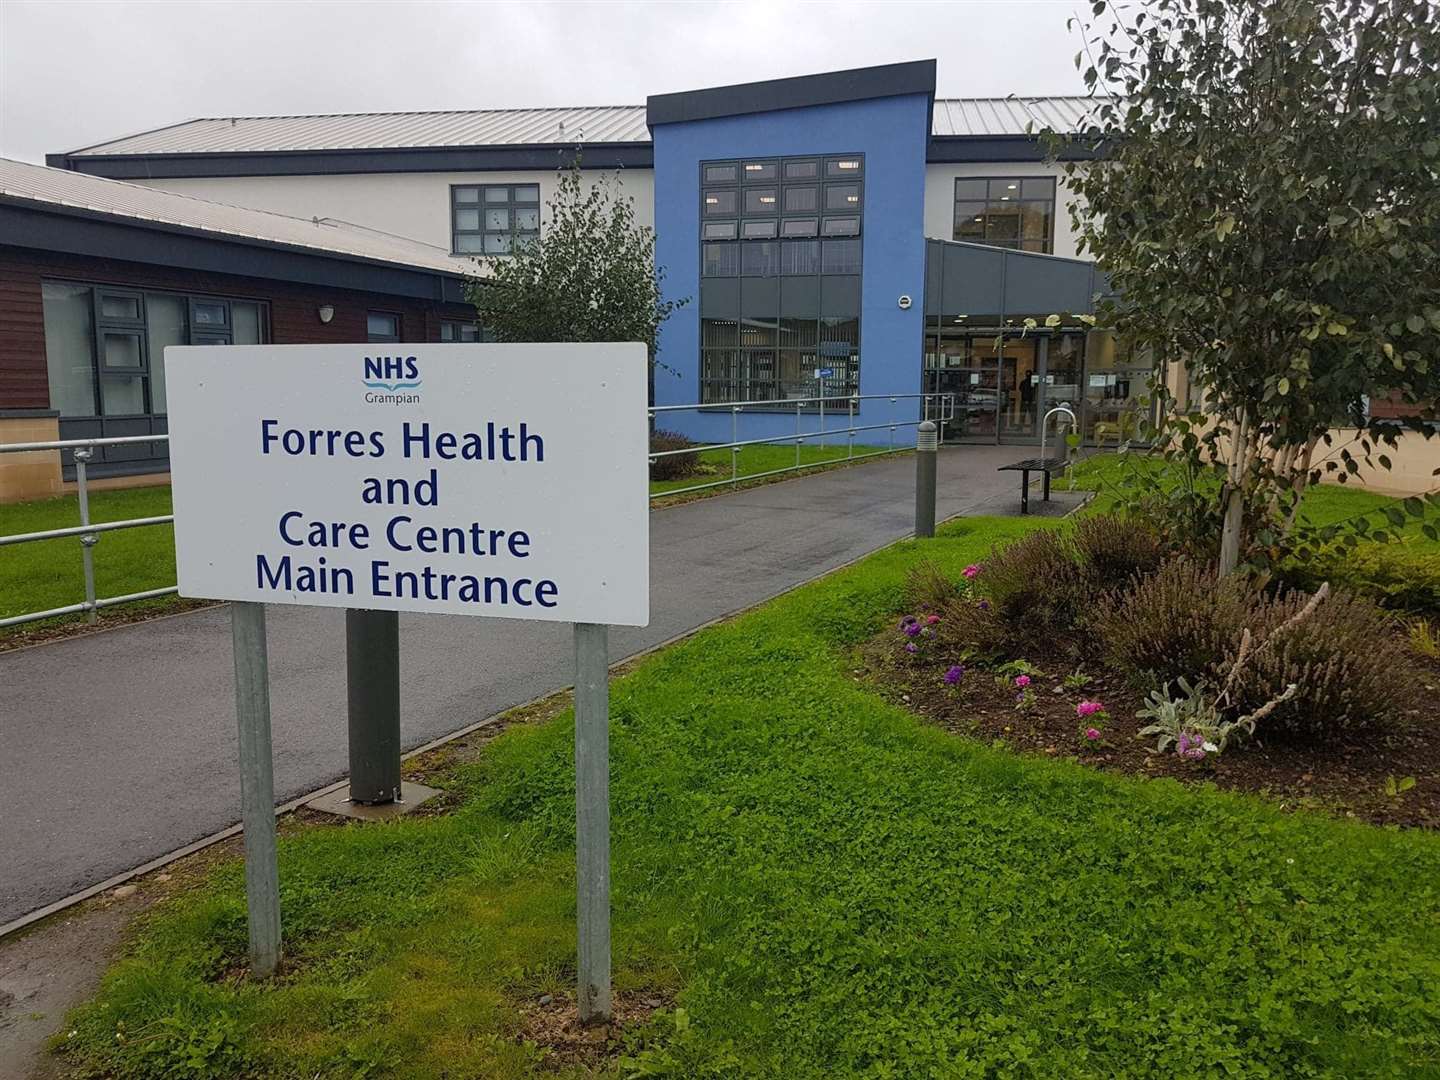 NHS Grampian appear to be no closer to resolving the tap water issue at Forres Health and Care Centre.